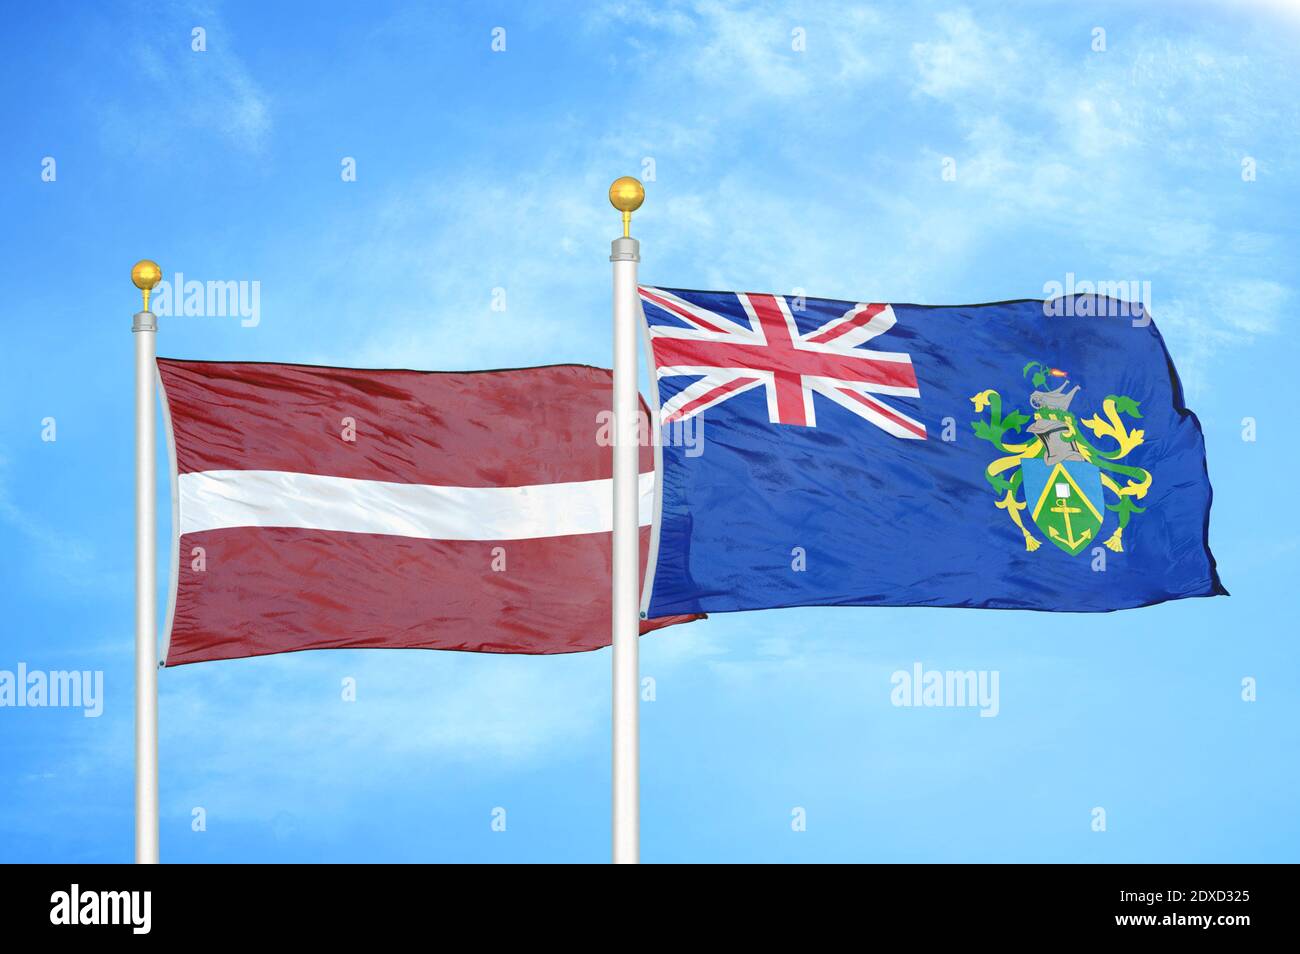 Latvia and Pitcairn Islands two flags on flagpoles and blue sky Stock Photo